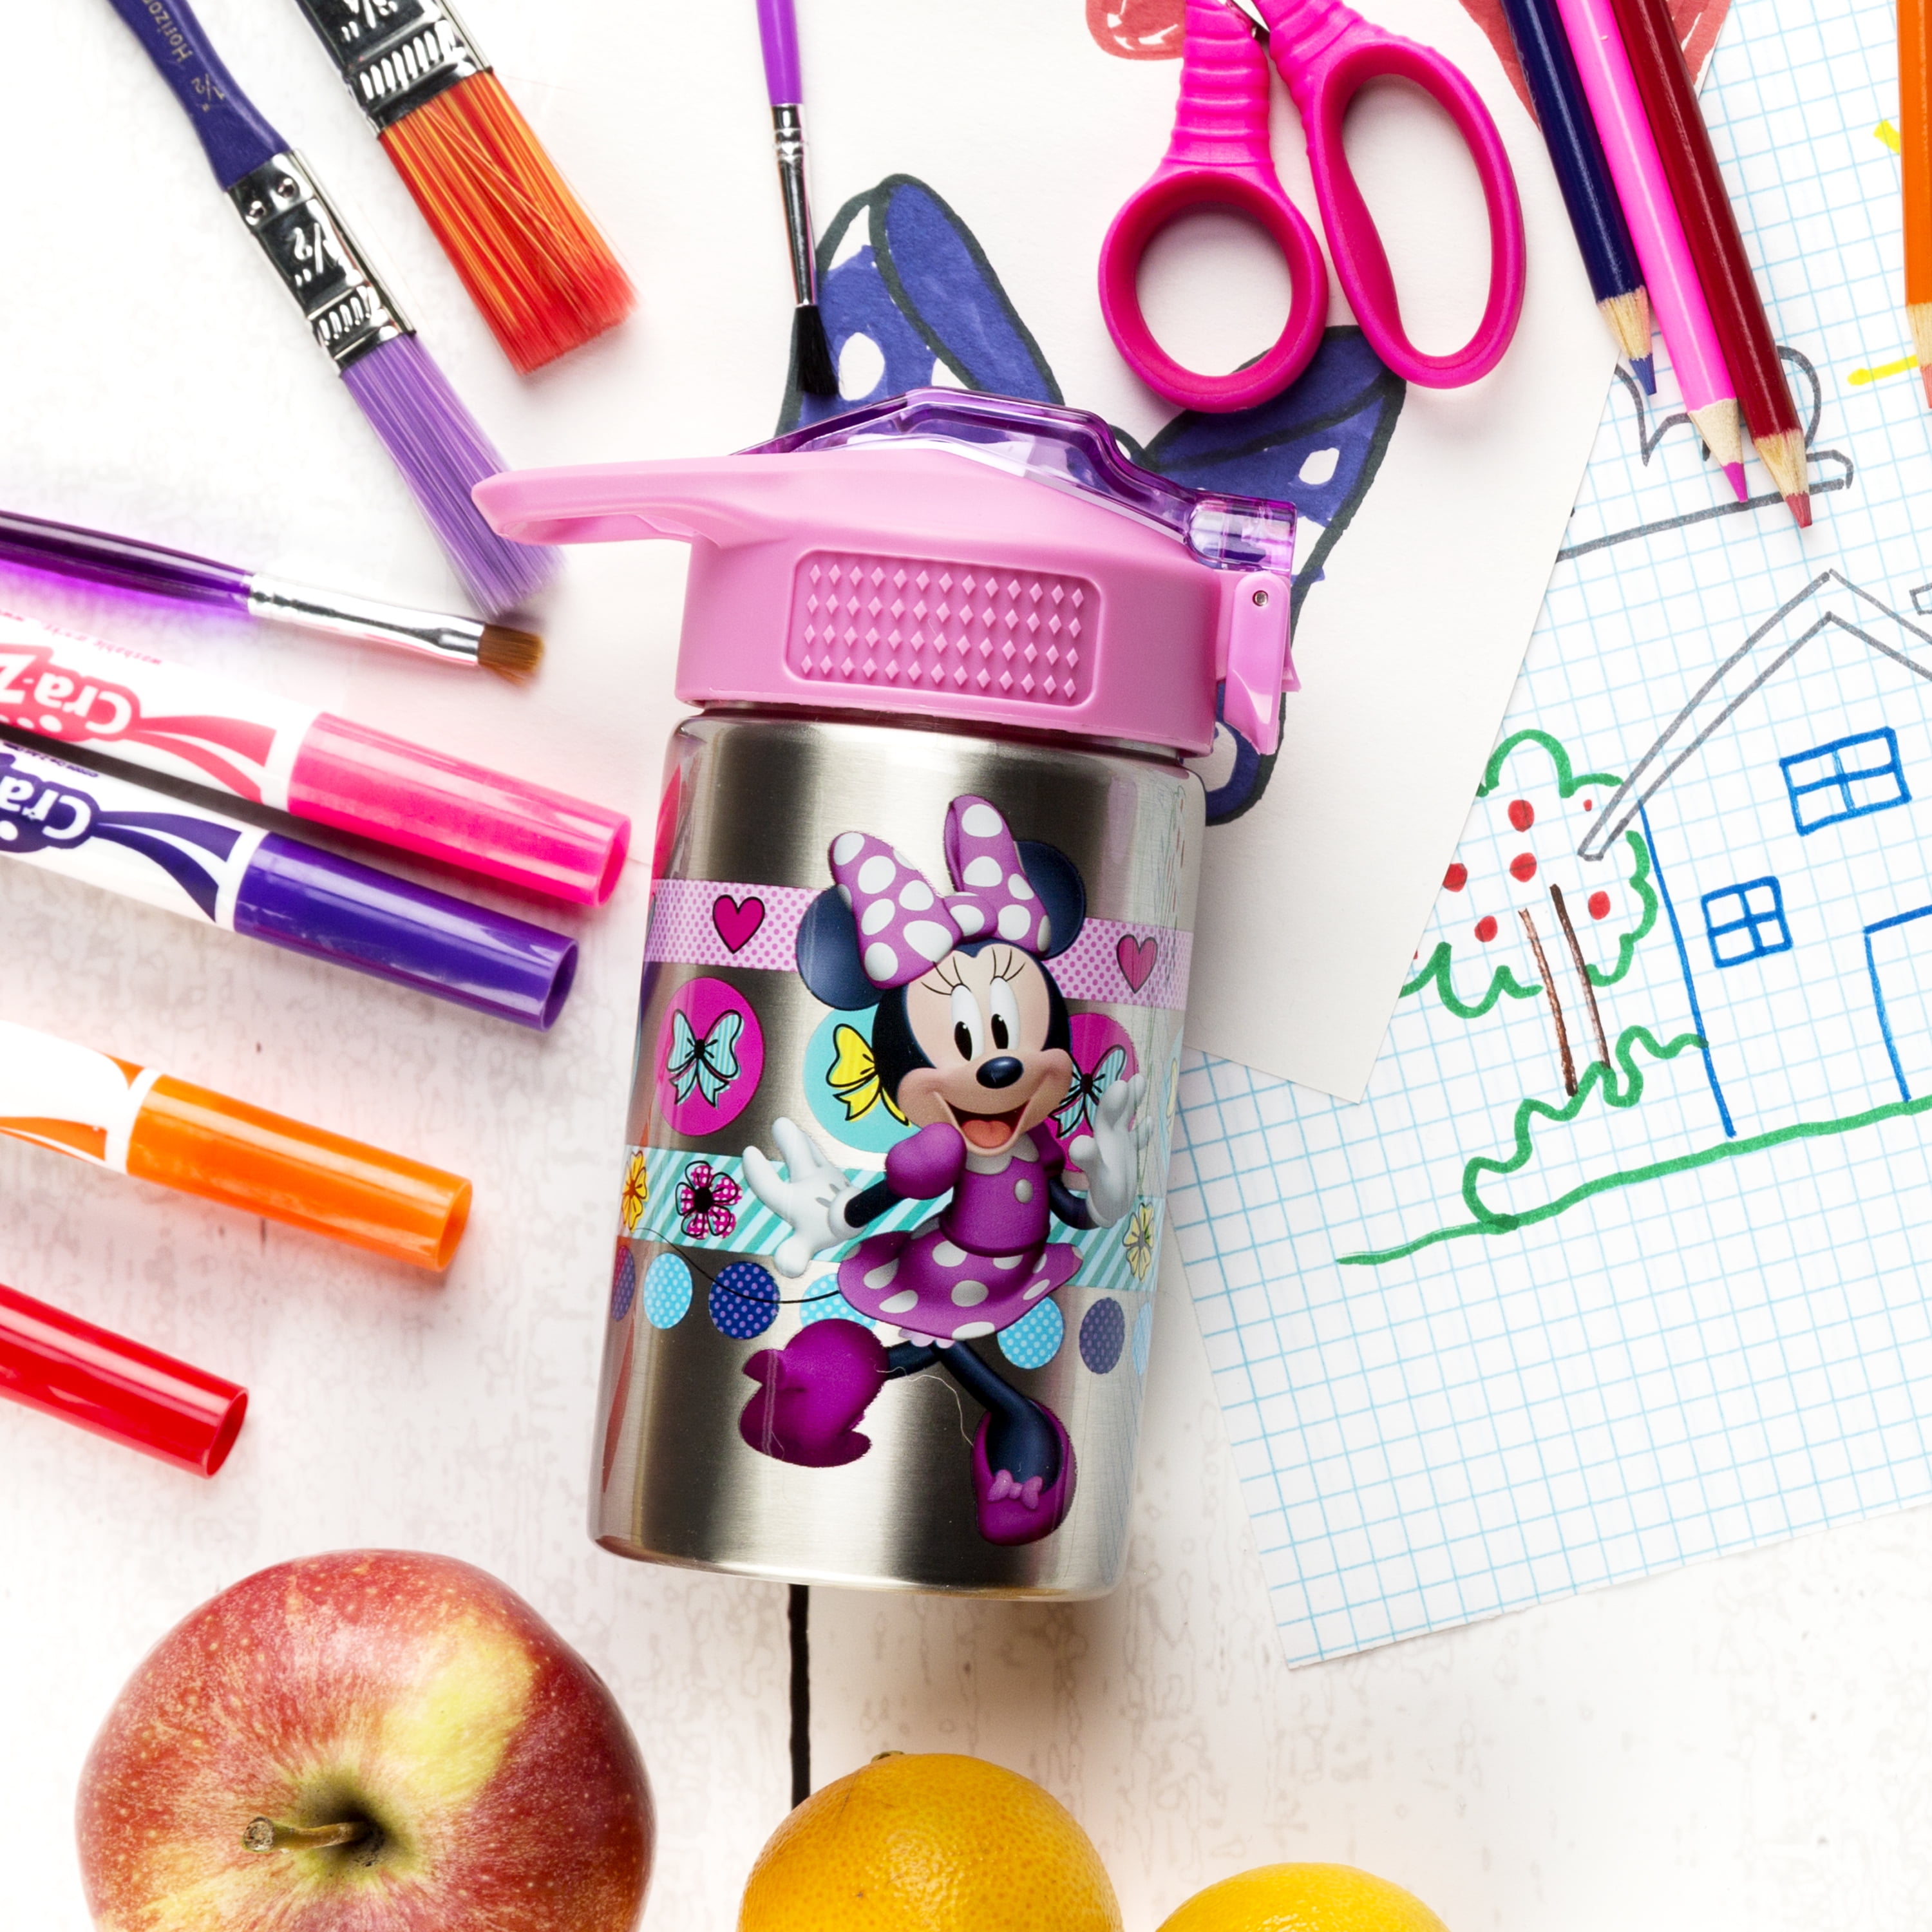  Zak Designs Disney Minnie's Happy Helpers - Stainless Steel Water  Bottle with One Hand Operation Action Lid and Built-in Carrying Loop, Kids Water  Bottle with Straw Spout (15.5 oz, 18/8, BPA